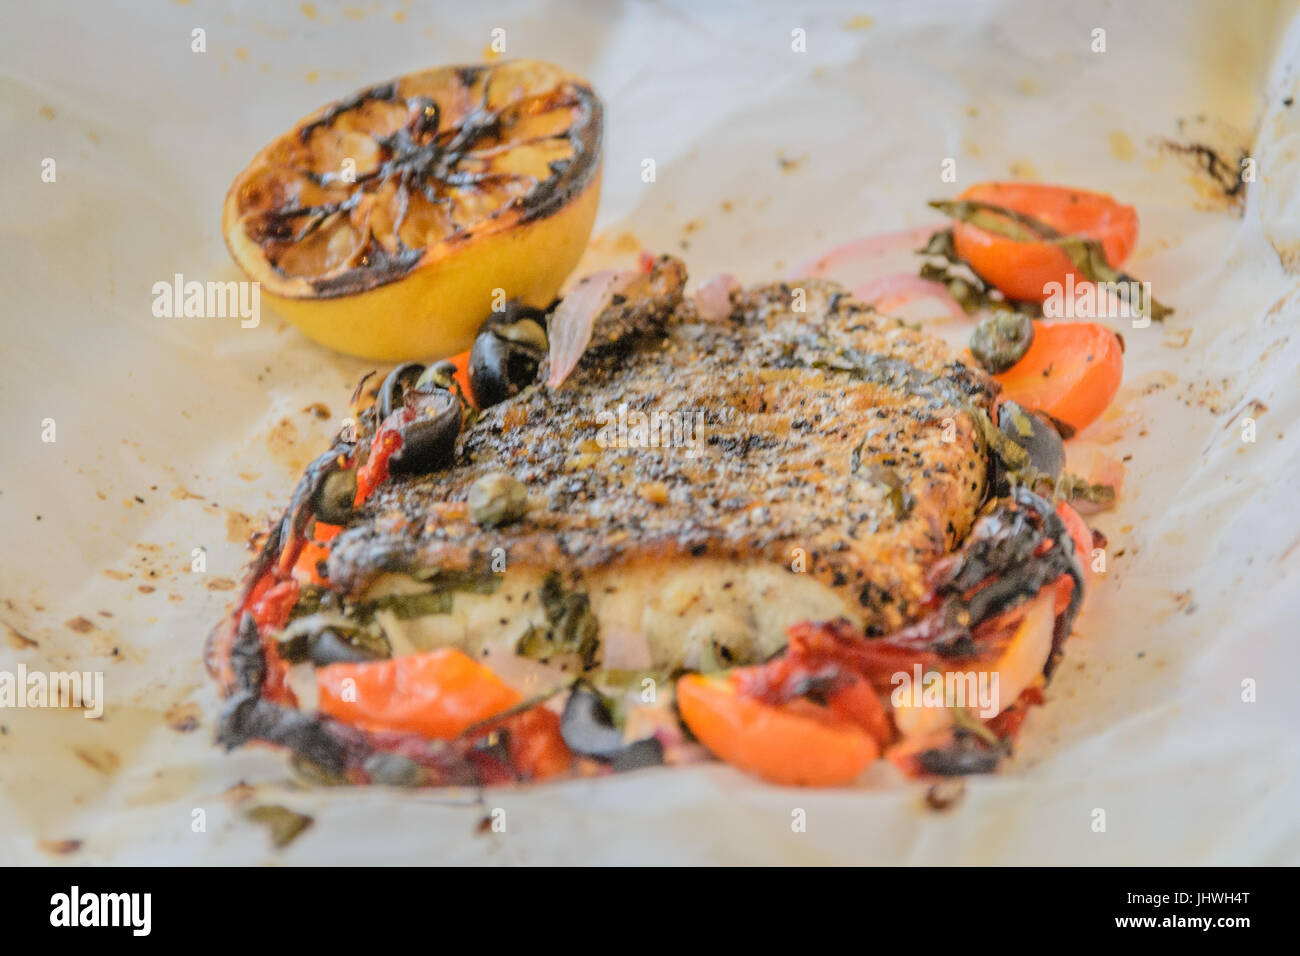 Sea bass Al Cartoccio fresh sea bass fillet cooked in parchment paper with sundried tomatoes, anchovies and capers Stock Photo